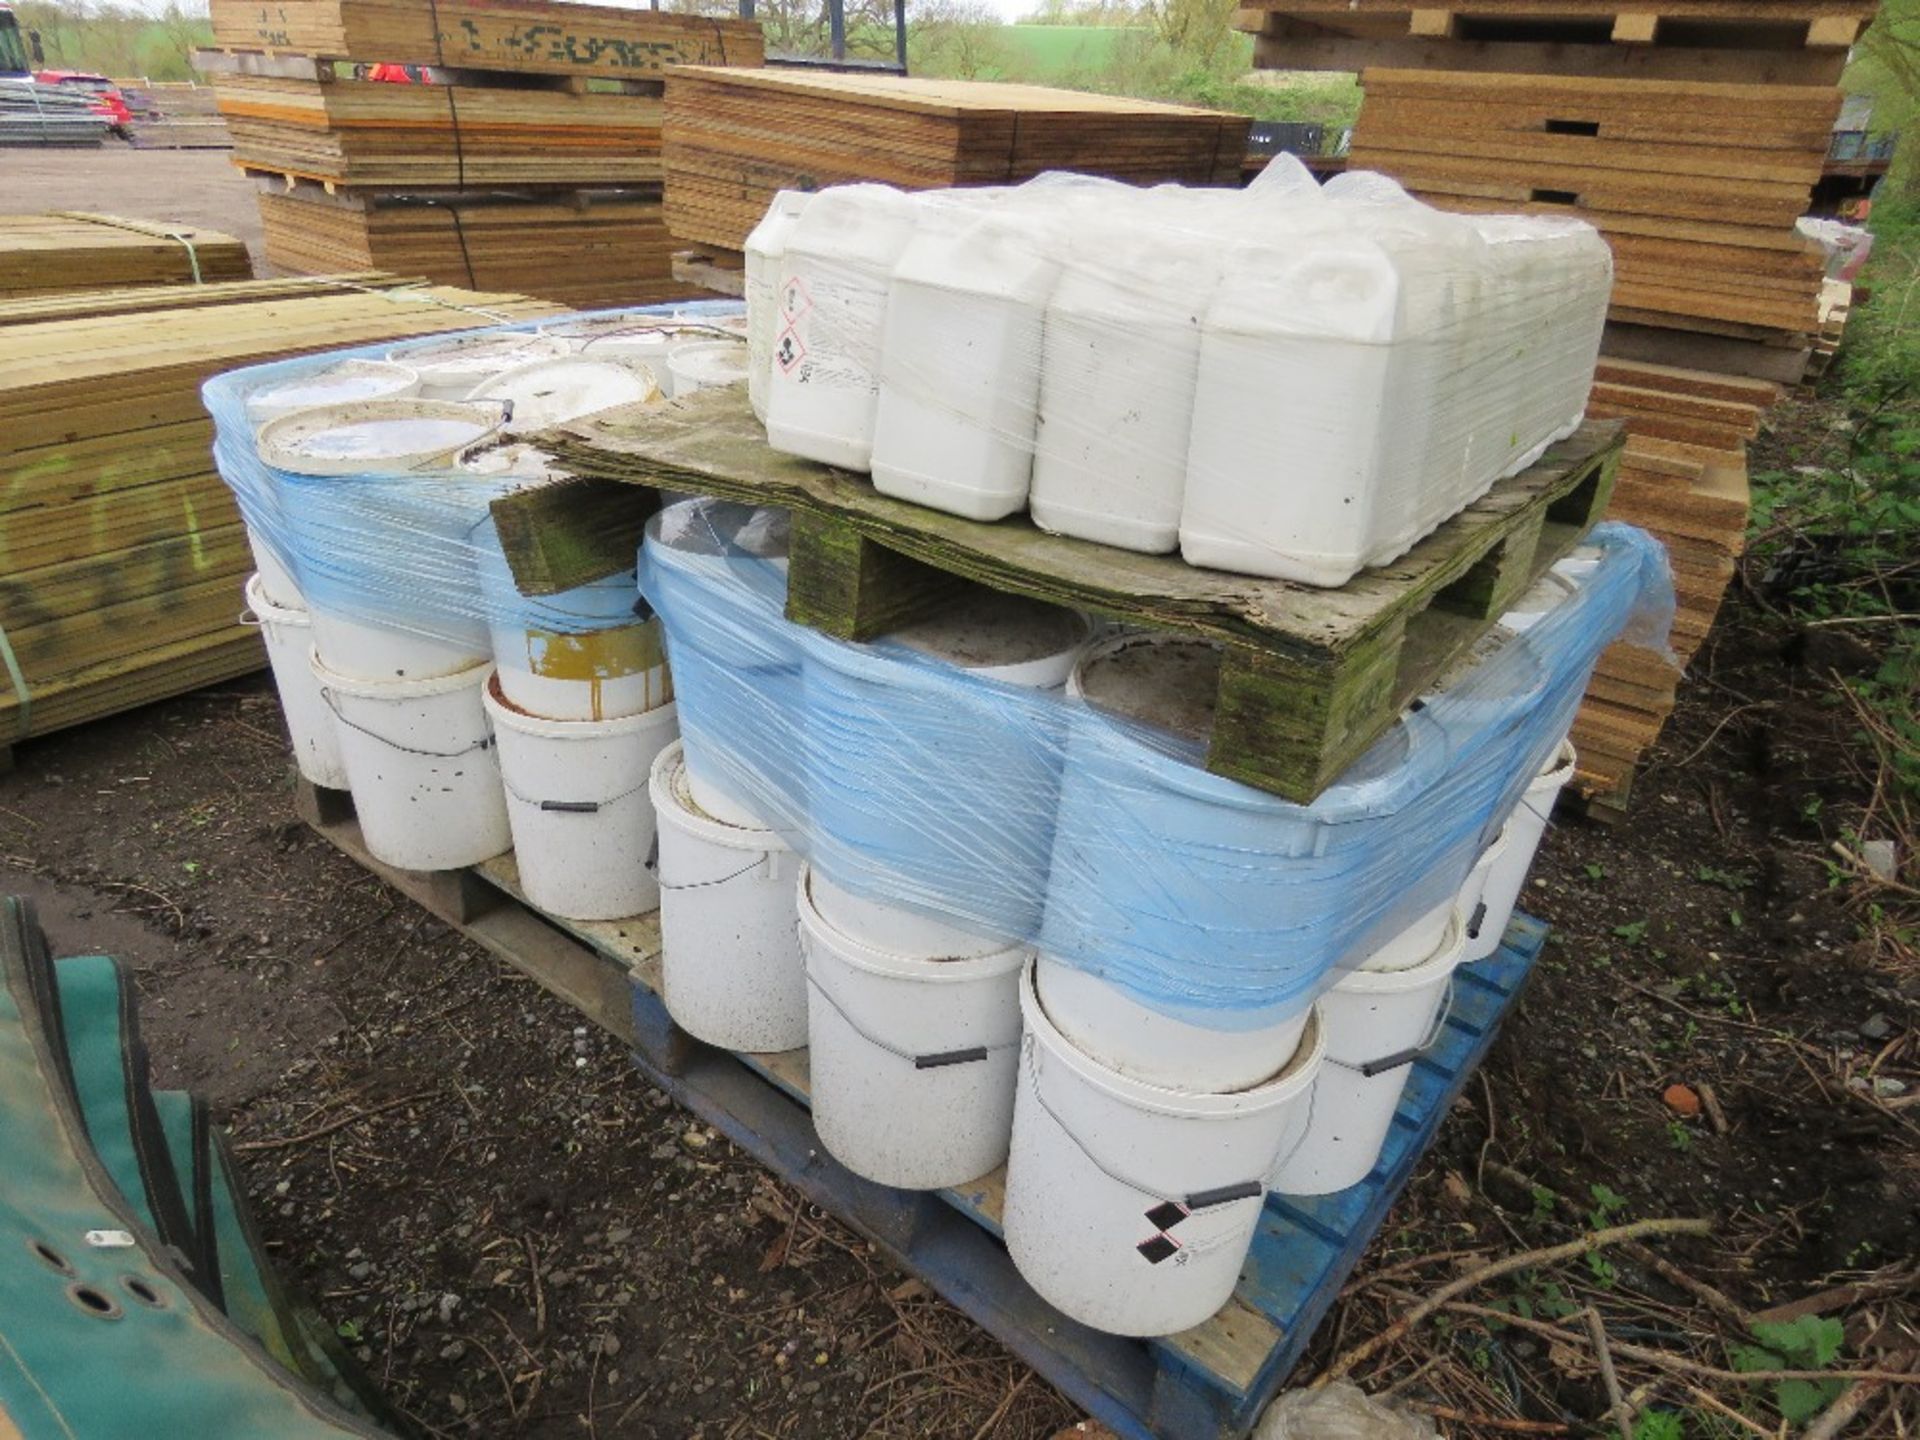 3 X PALLETS OF FOSROC NITODEK UR SPECIALIST MEMBRANE PRODUCT. SURPLUS TO REQUIREMENTS, OVER ORDERED. - Image 2 of 6